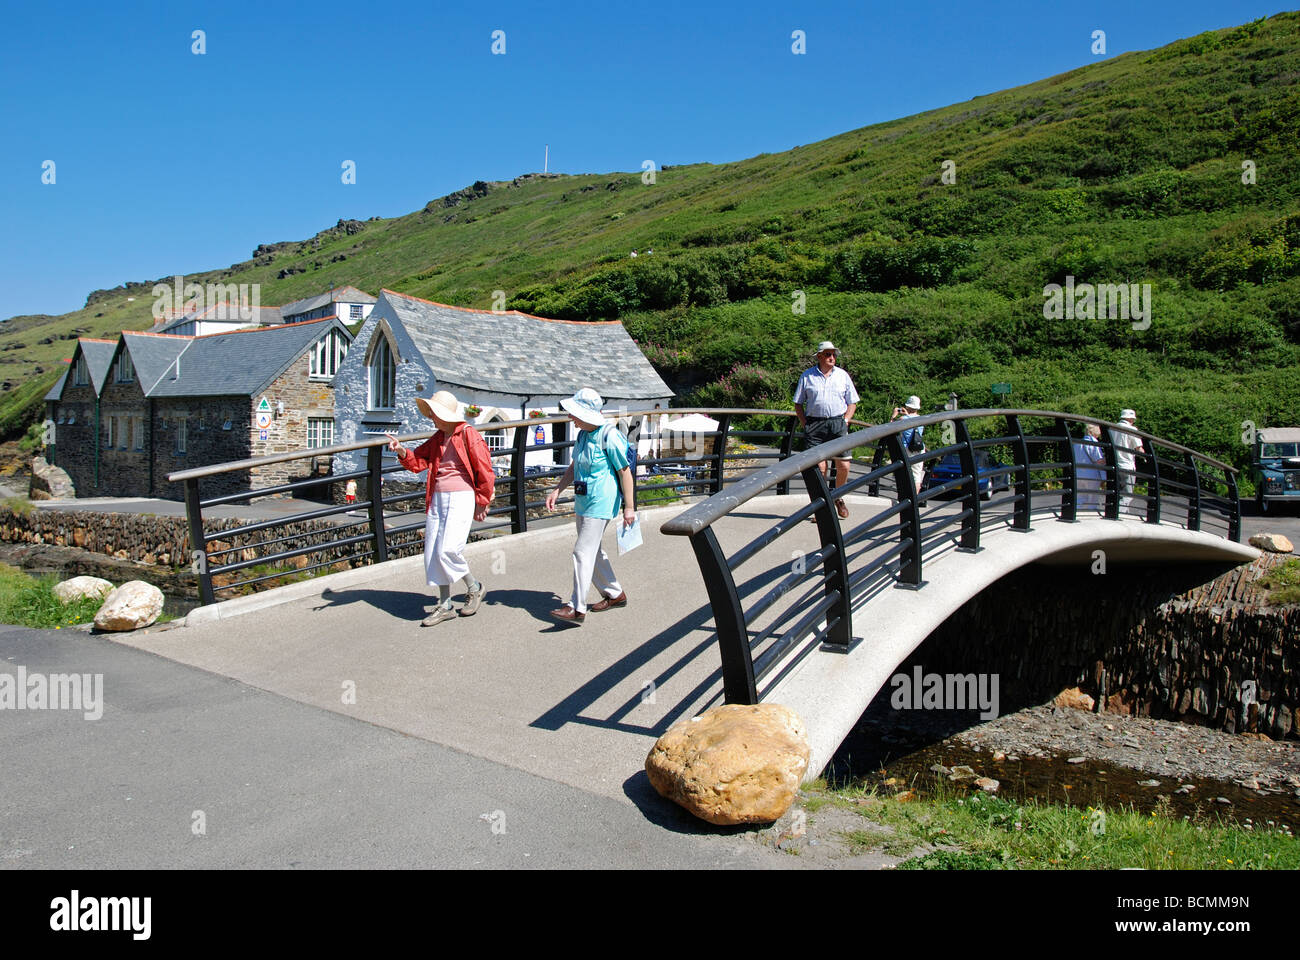 the new bridge over the river valency at boscastle in cornwall, uk Stock Photo